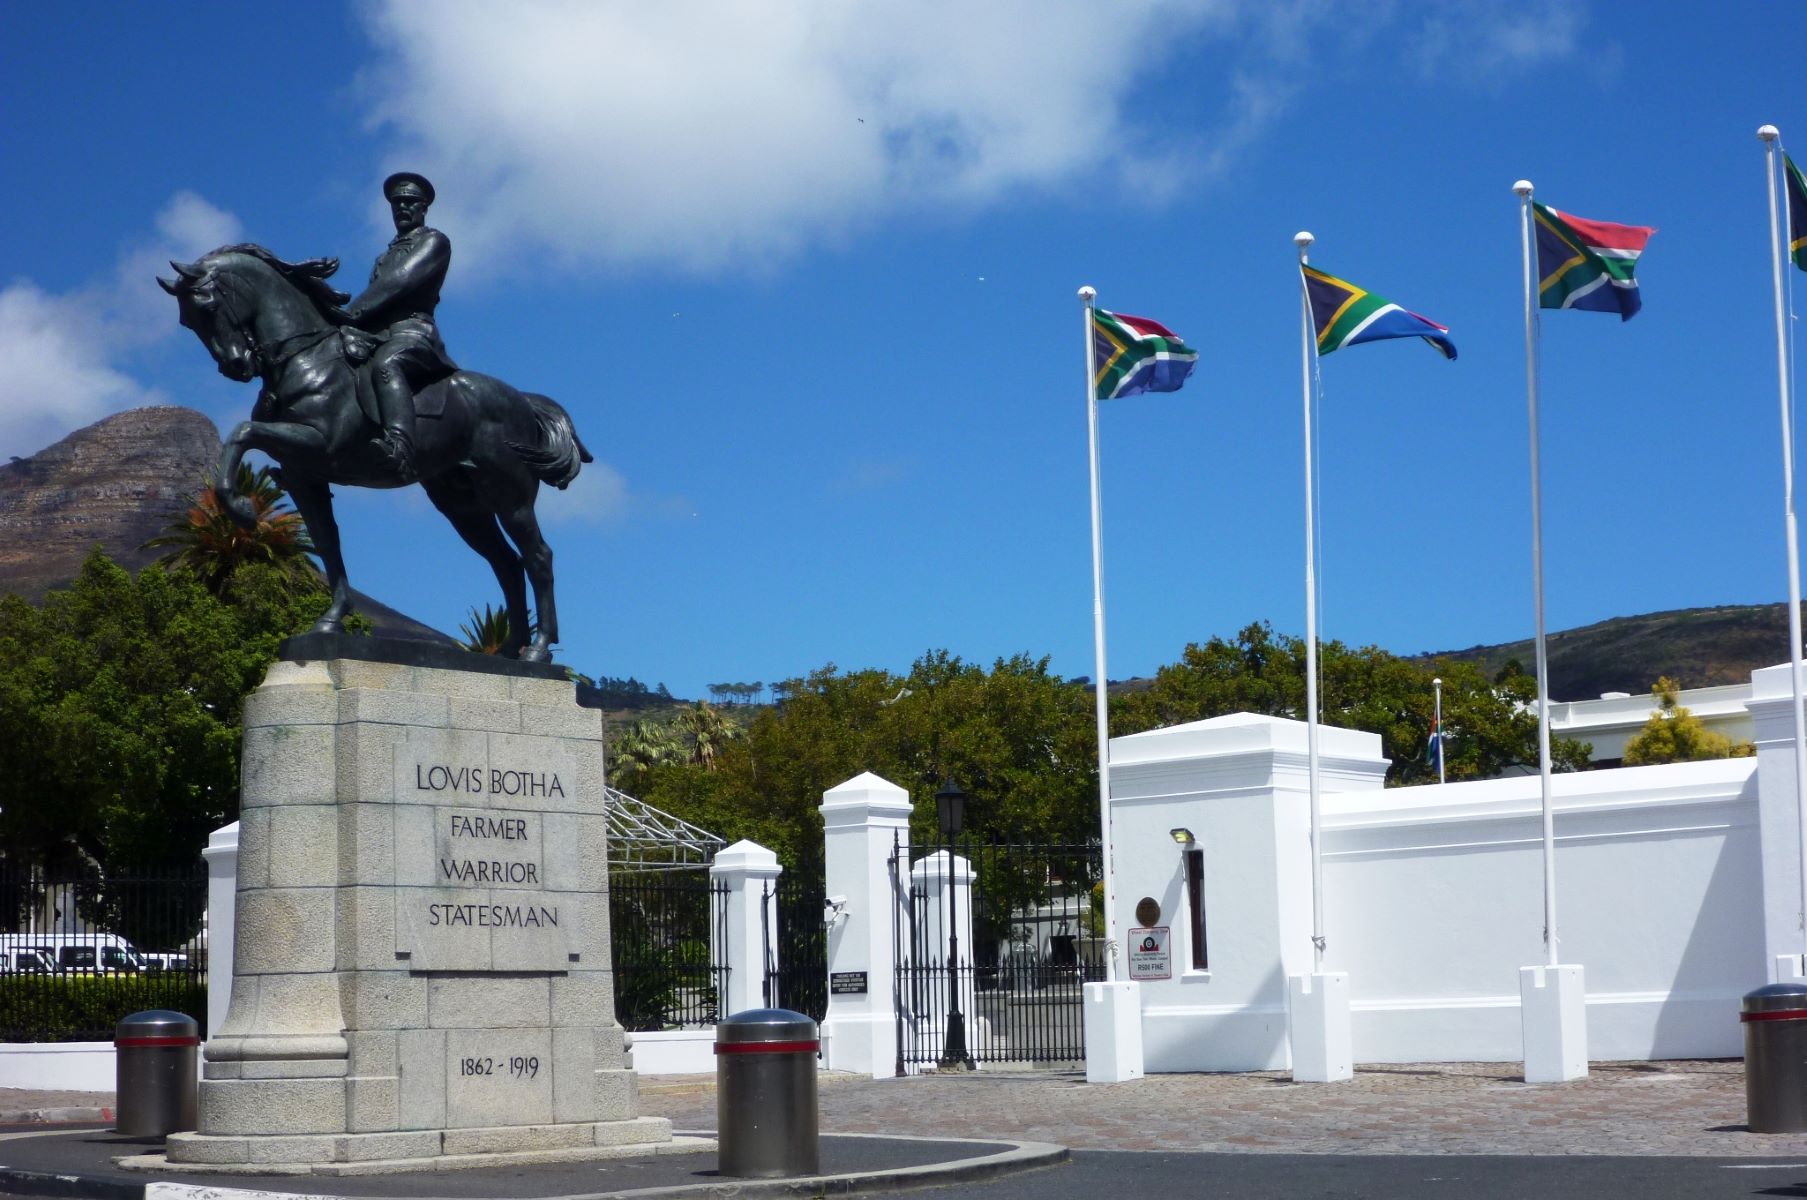 13-astounding-facts-about-the-louis-botha-statue